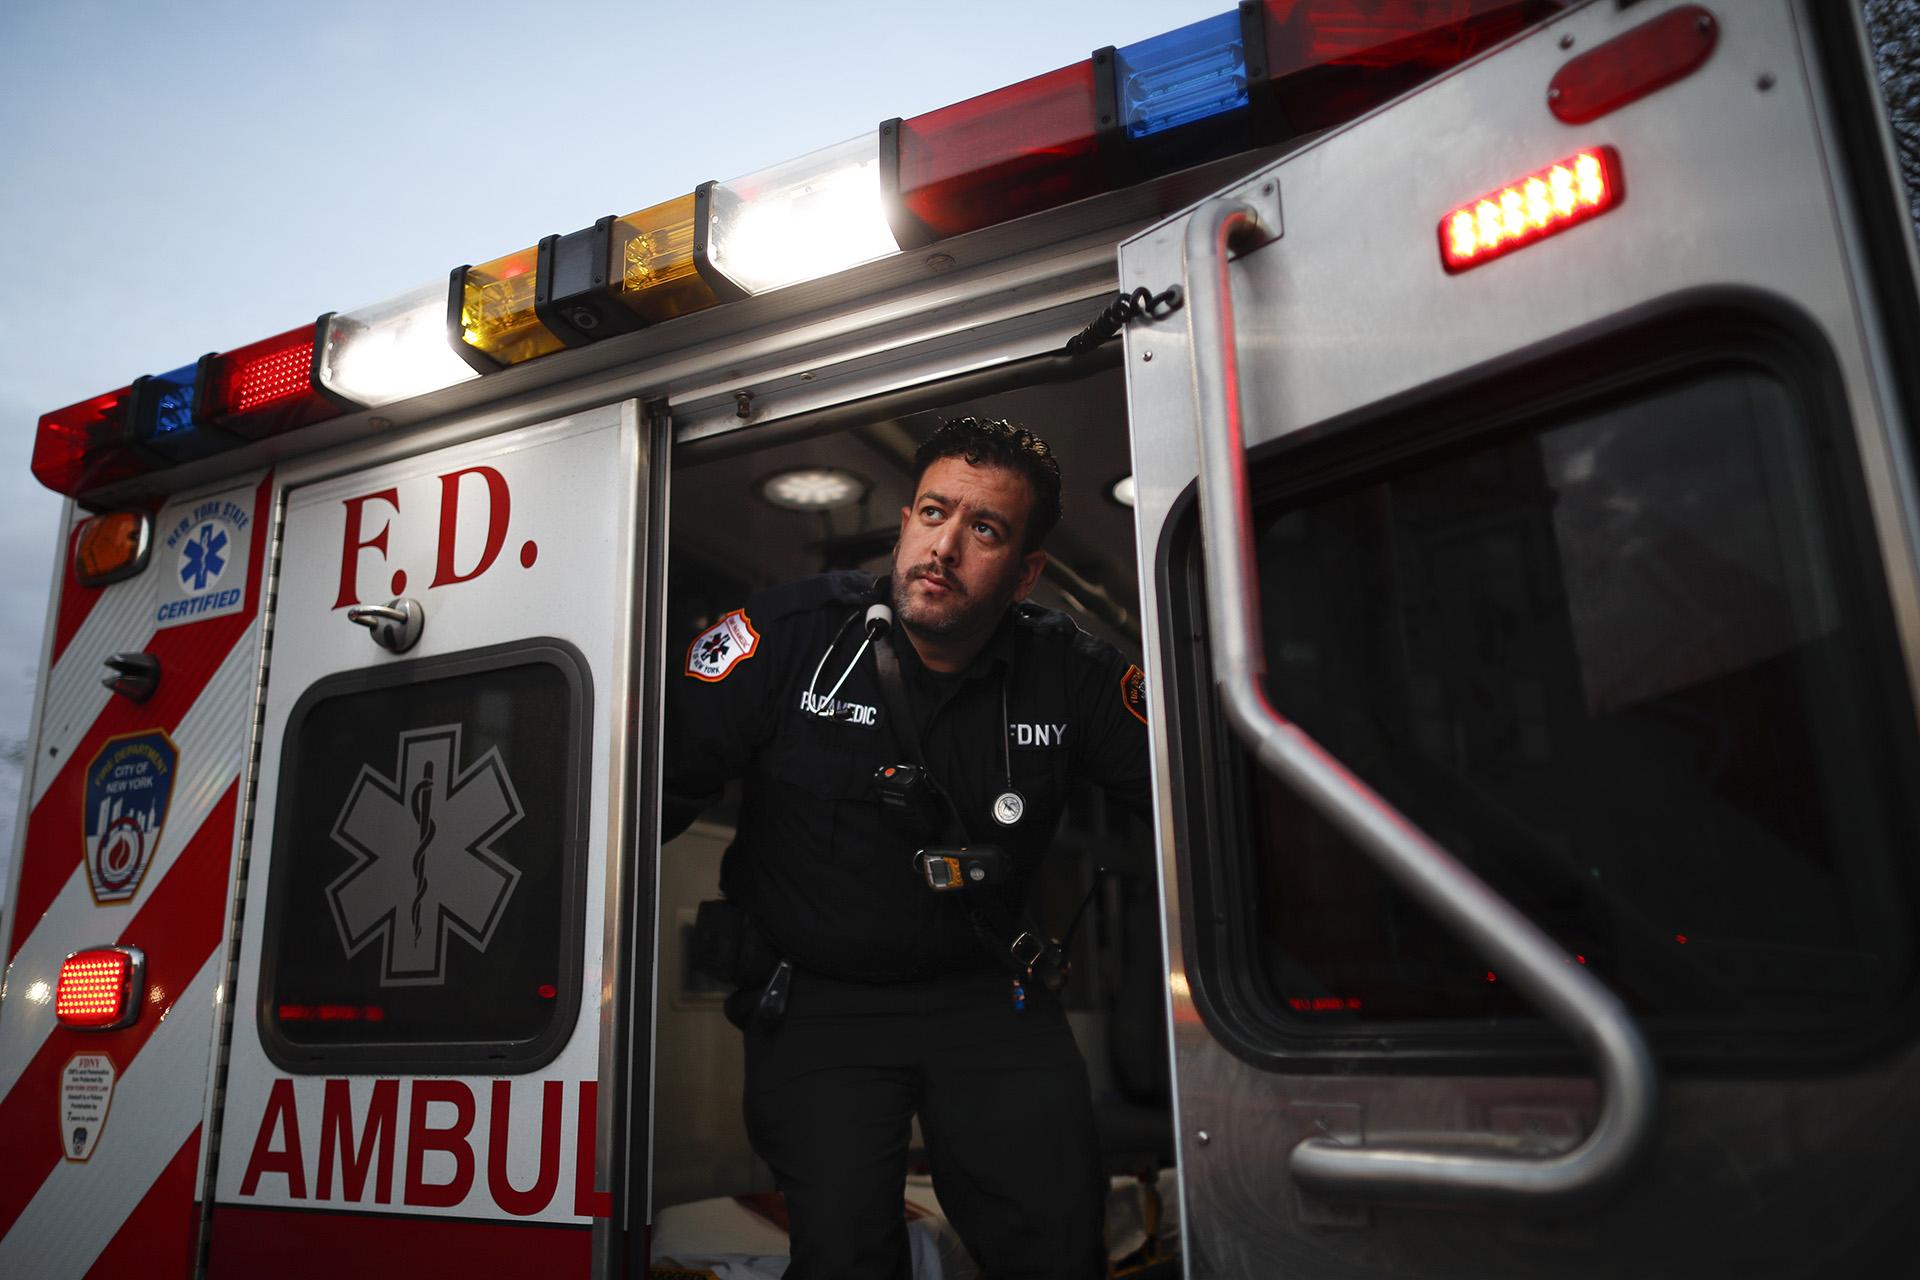 In this April 23, 2020, photo FDNY paramedic Alex Tull, who has recently recovered from COVID-19, prepares to begin his shift outside EMS station 26, the “Tinhouse”, in the Bronx borough of New York. (AP Photo / John Minchillo)